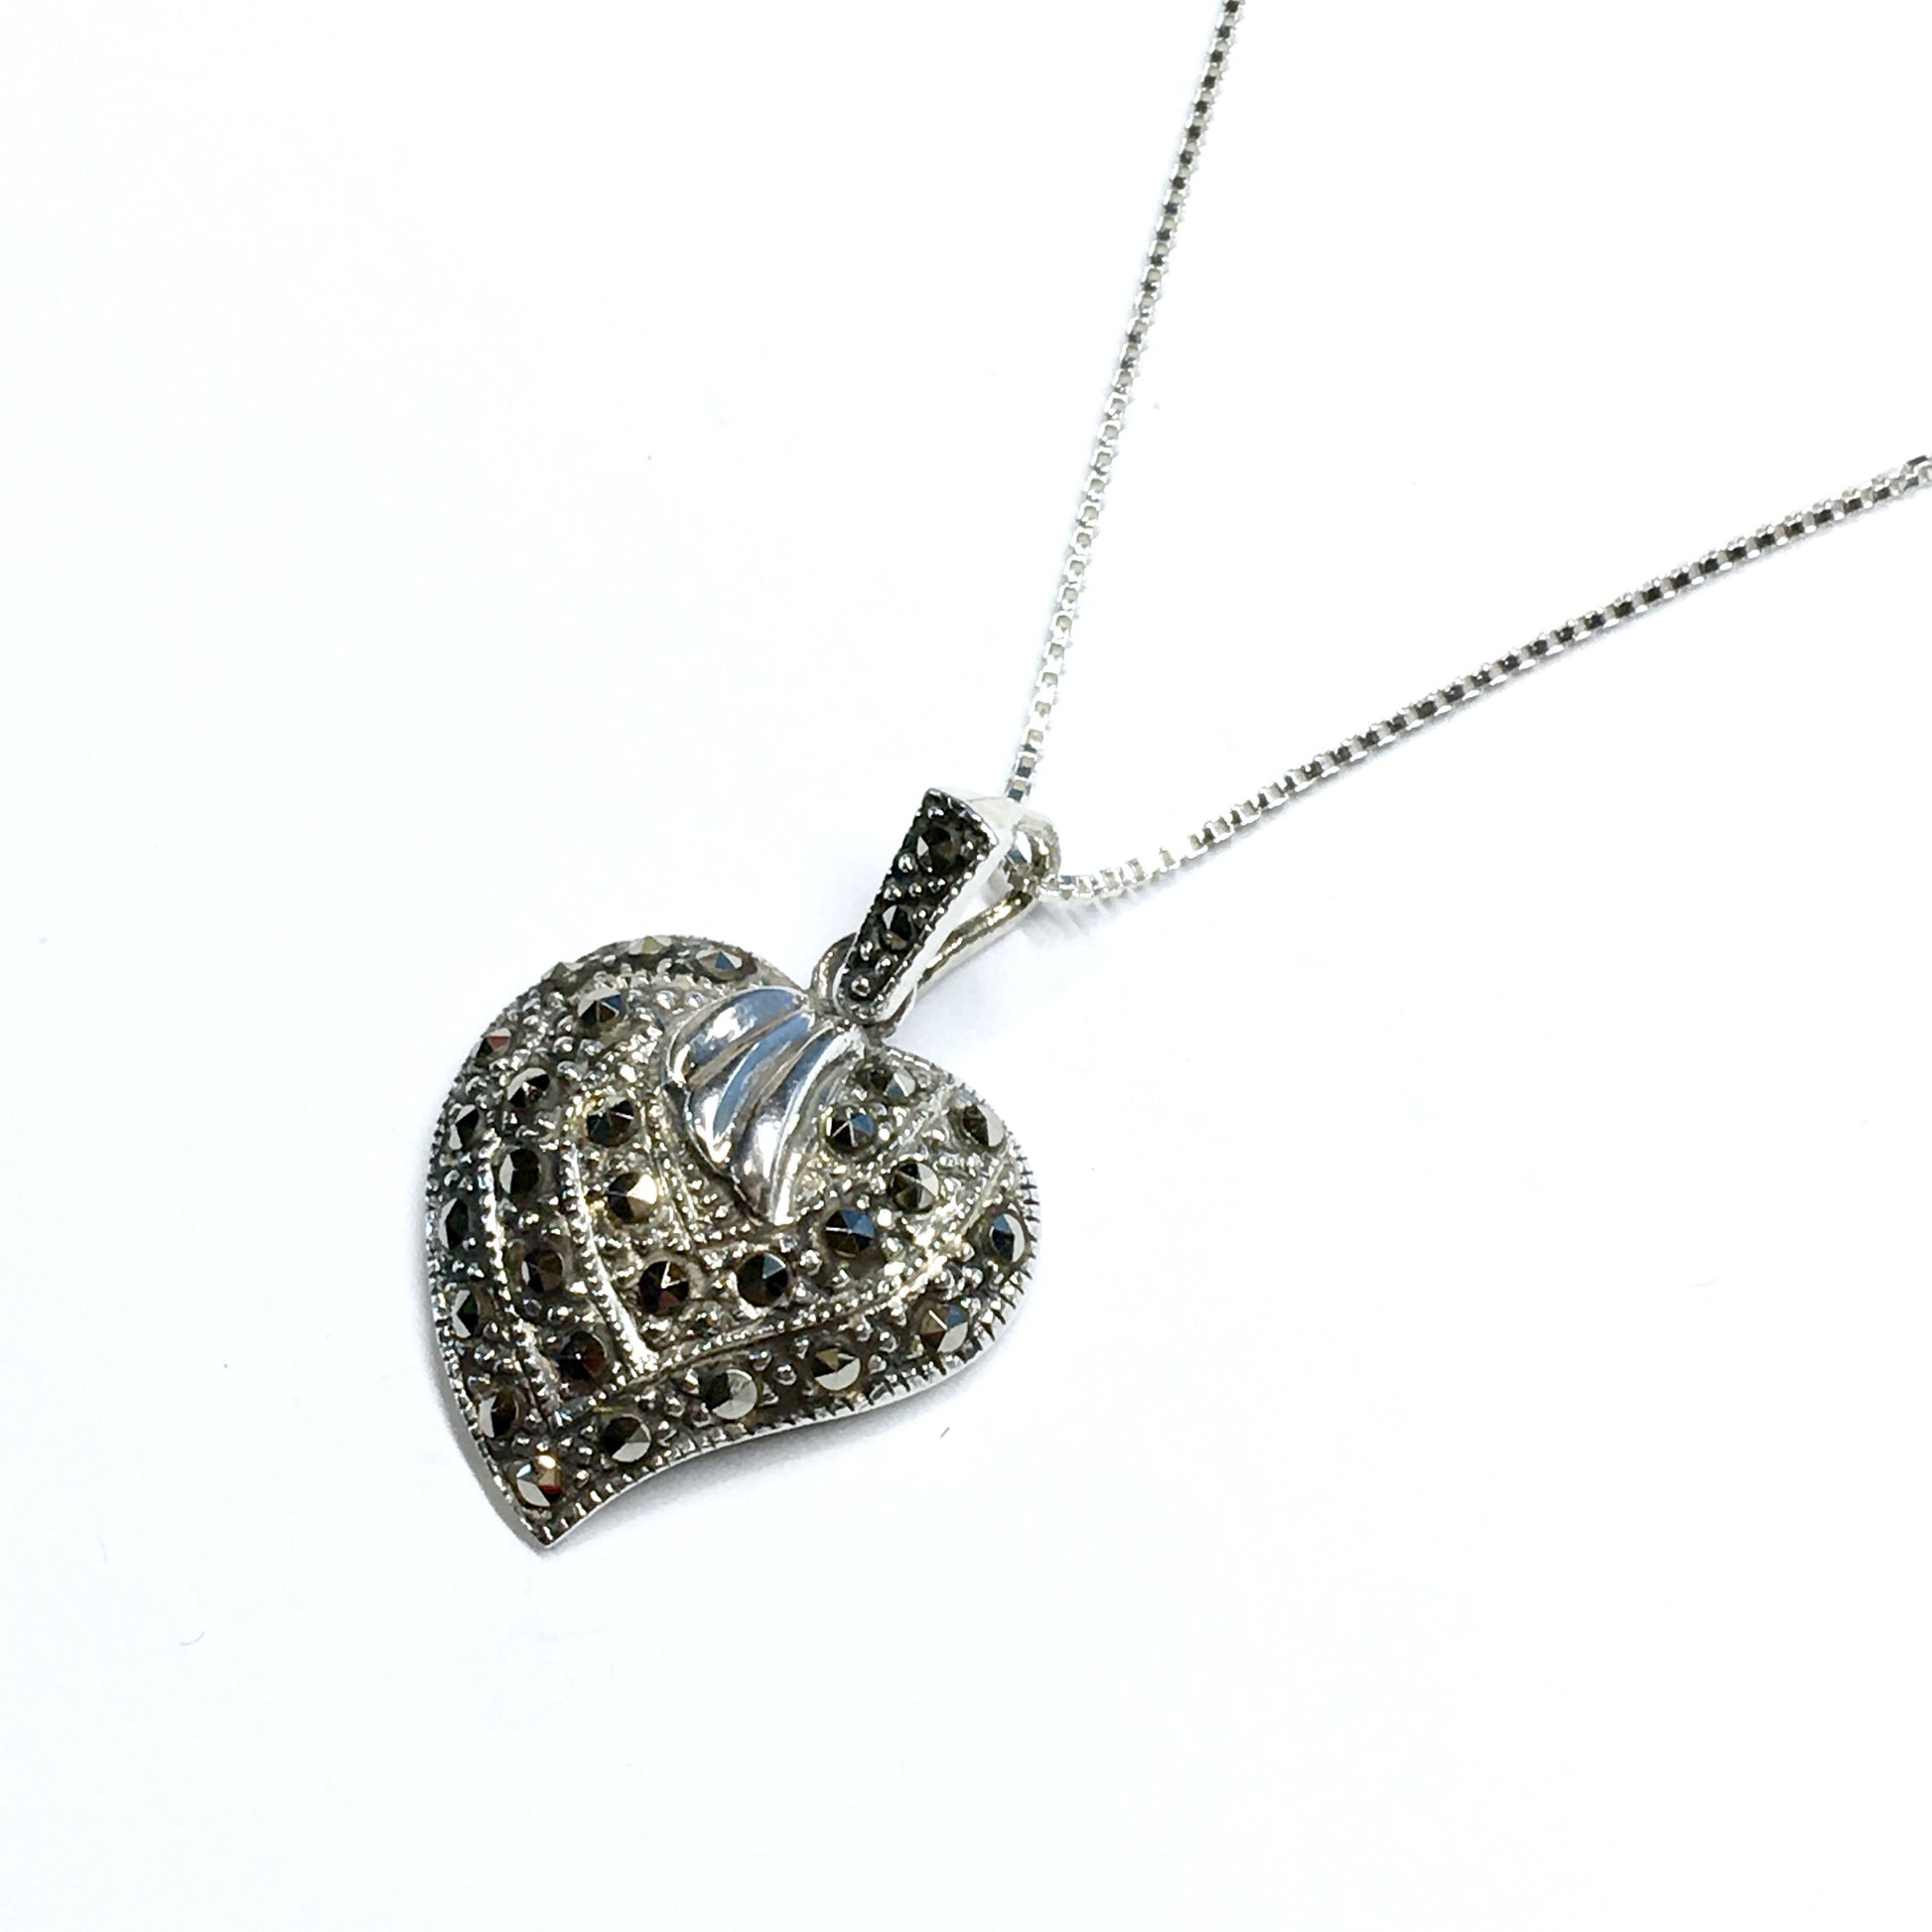 Box Chain Necklace w/ Marcasite Heart Pendant Sterling Silver 20" - Blingschlingers Jewelry